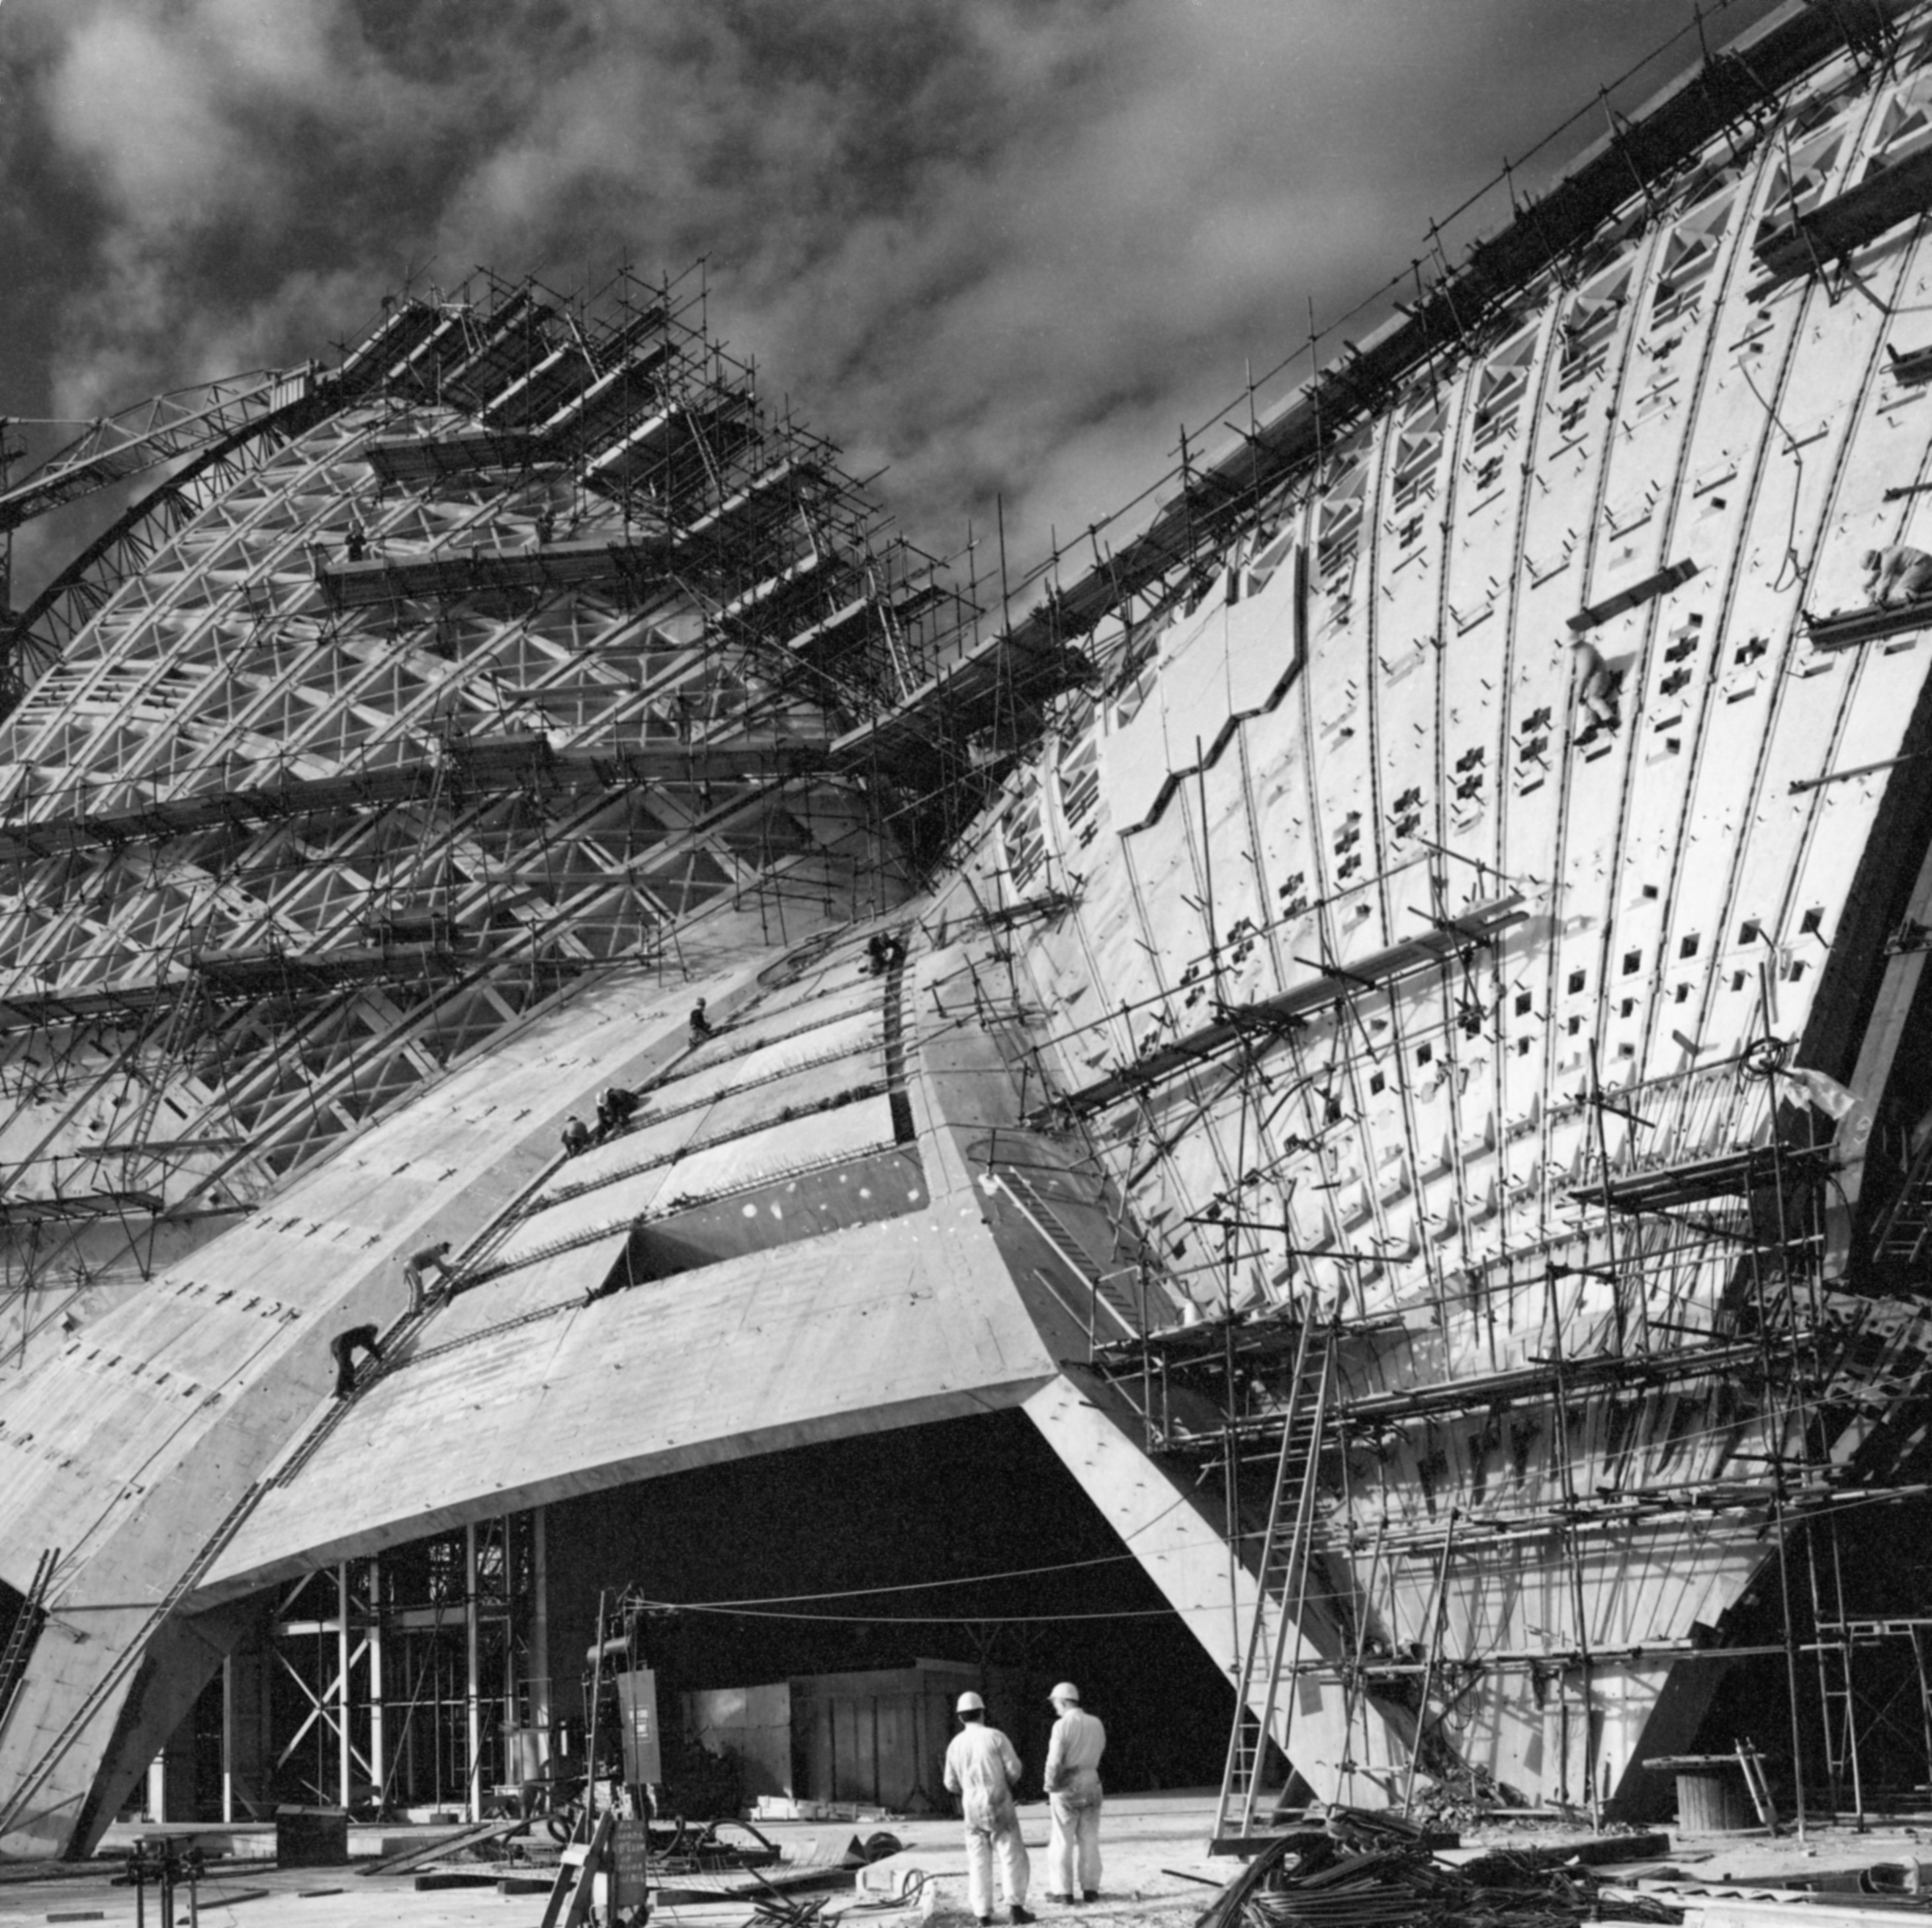 The famous Sydney Opera House under construction in Sydney, Australia in 1966. The project started in 1959, and wasn't fully completed for 14 years until 1973. The project ran so far over its budget and had such complications during all that time, that it overall ended up costing around $102 million, or after being adjusted for inflation, almost $1 billion today.